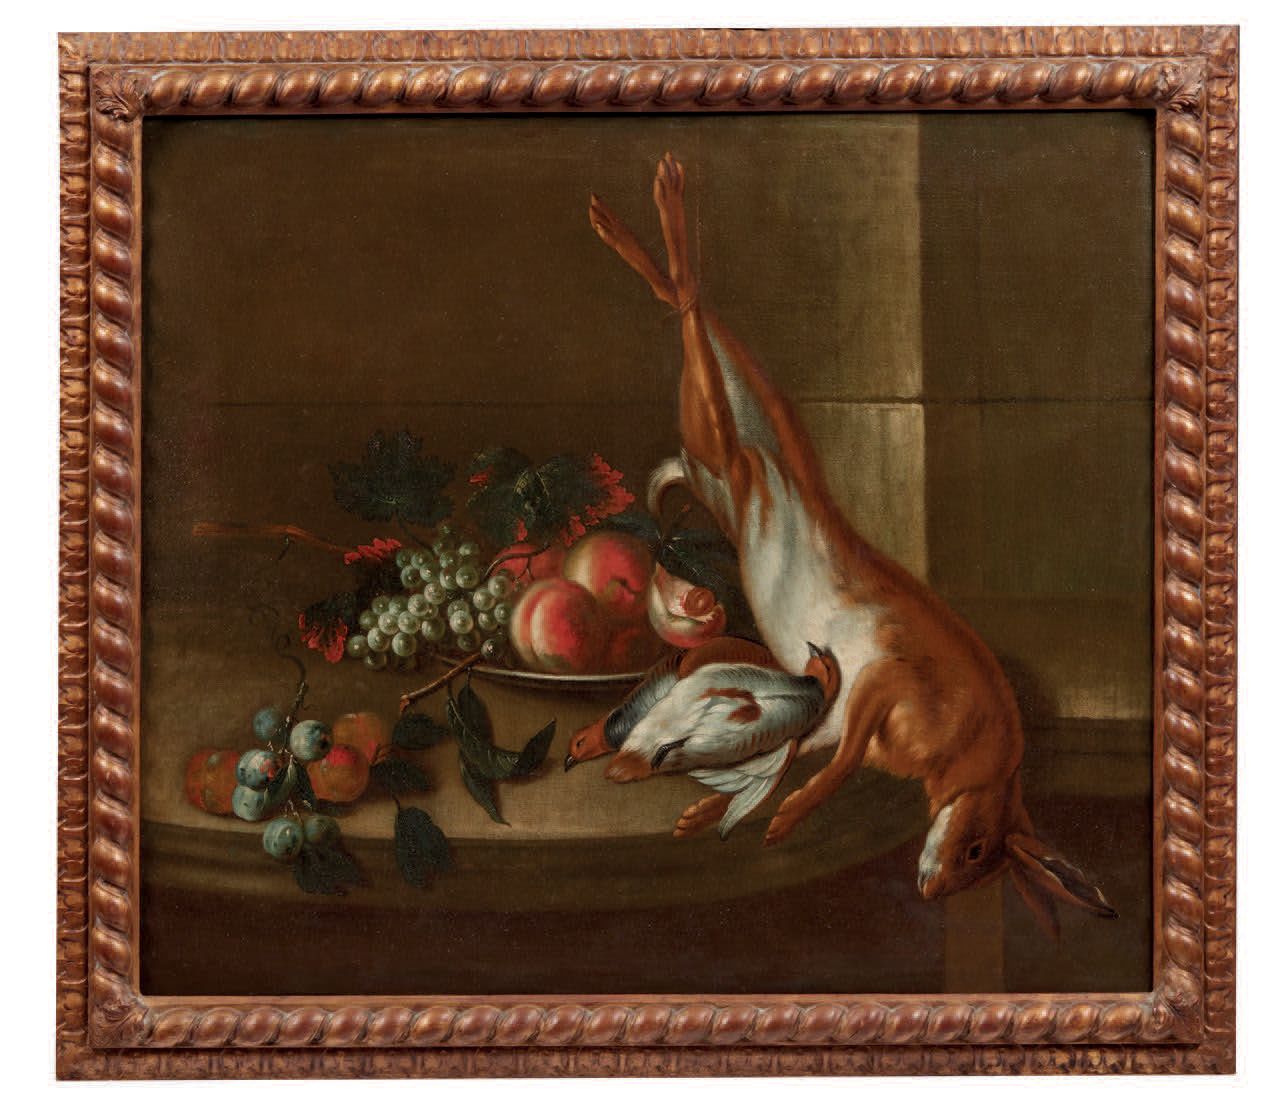 PITTORE DEL XVIII-XIX SECOLO 
Still life with fruits and game
Oil on canvas
Écol&hellip;